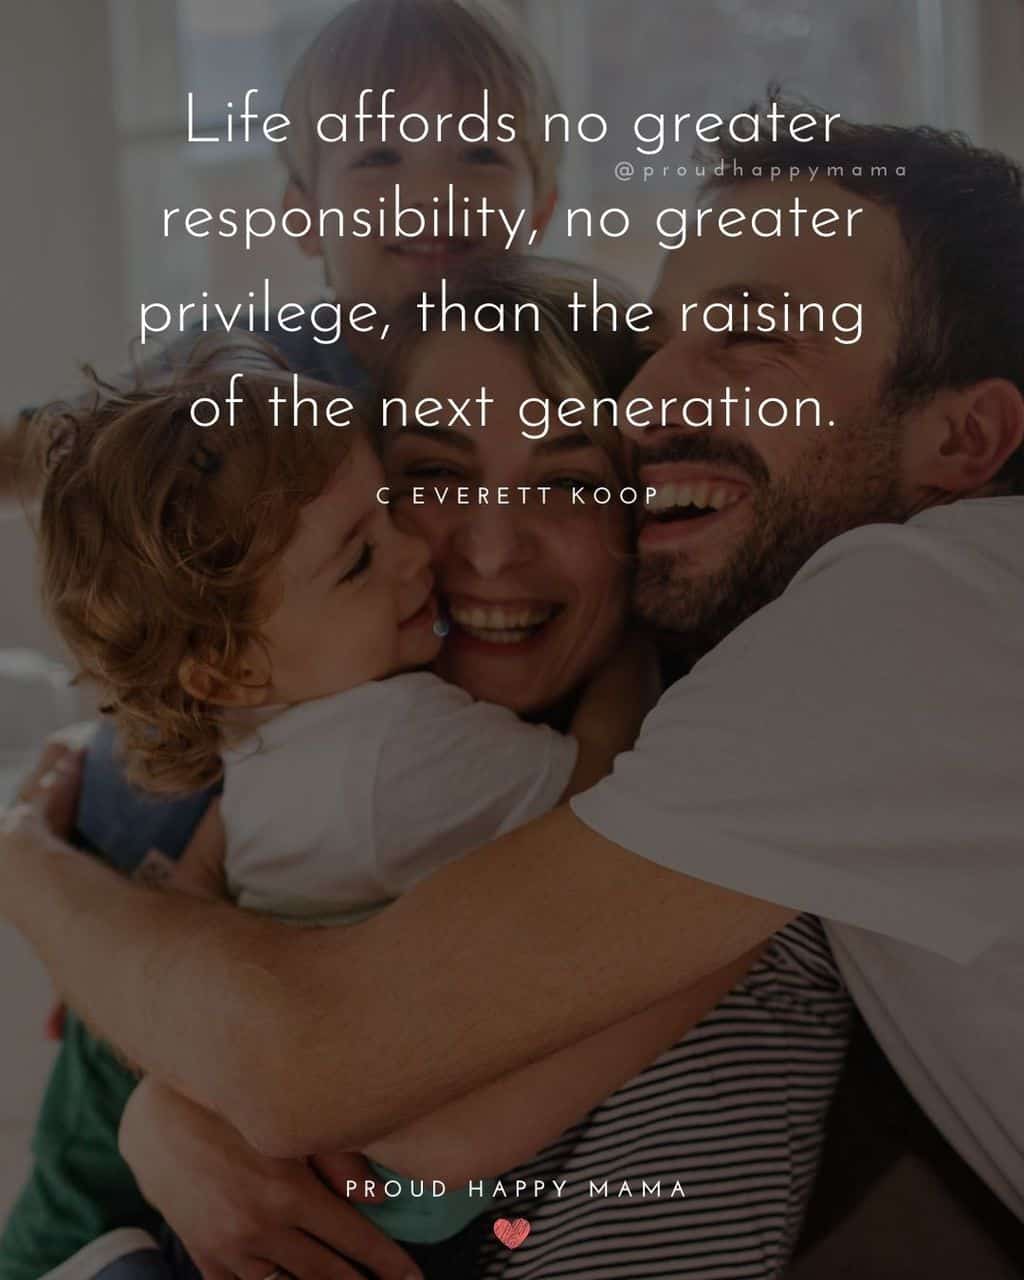 Parenting Quotes - Life affords no greater responsibility, no greater privilege, than the raising of the next generation.’ – C Everett Koop